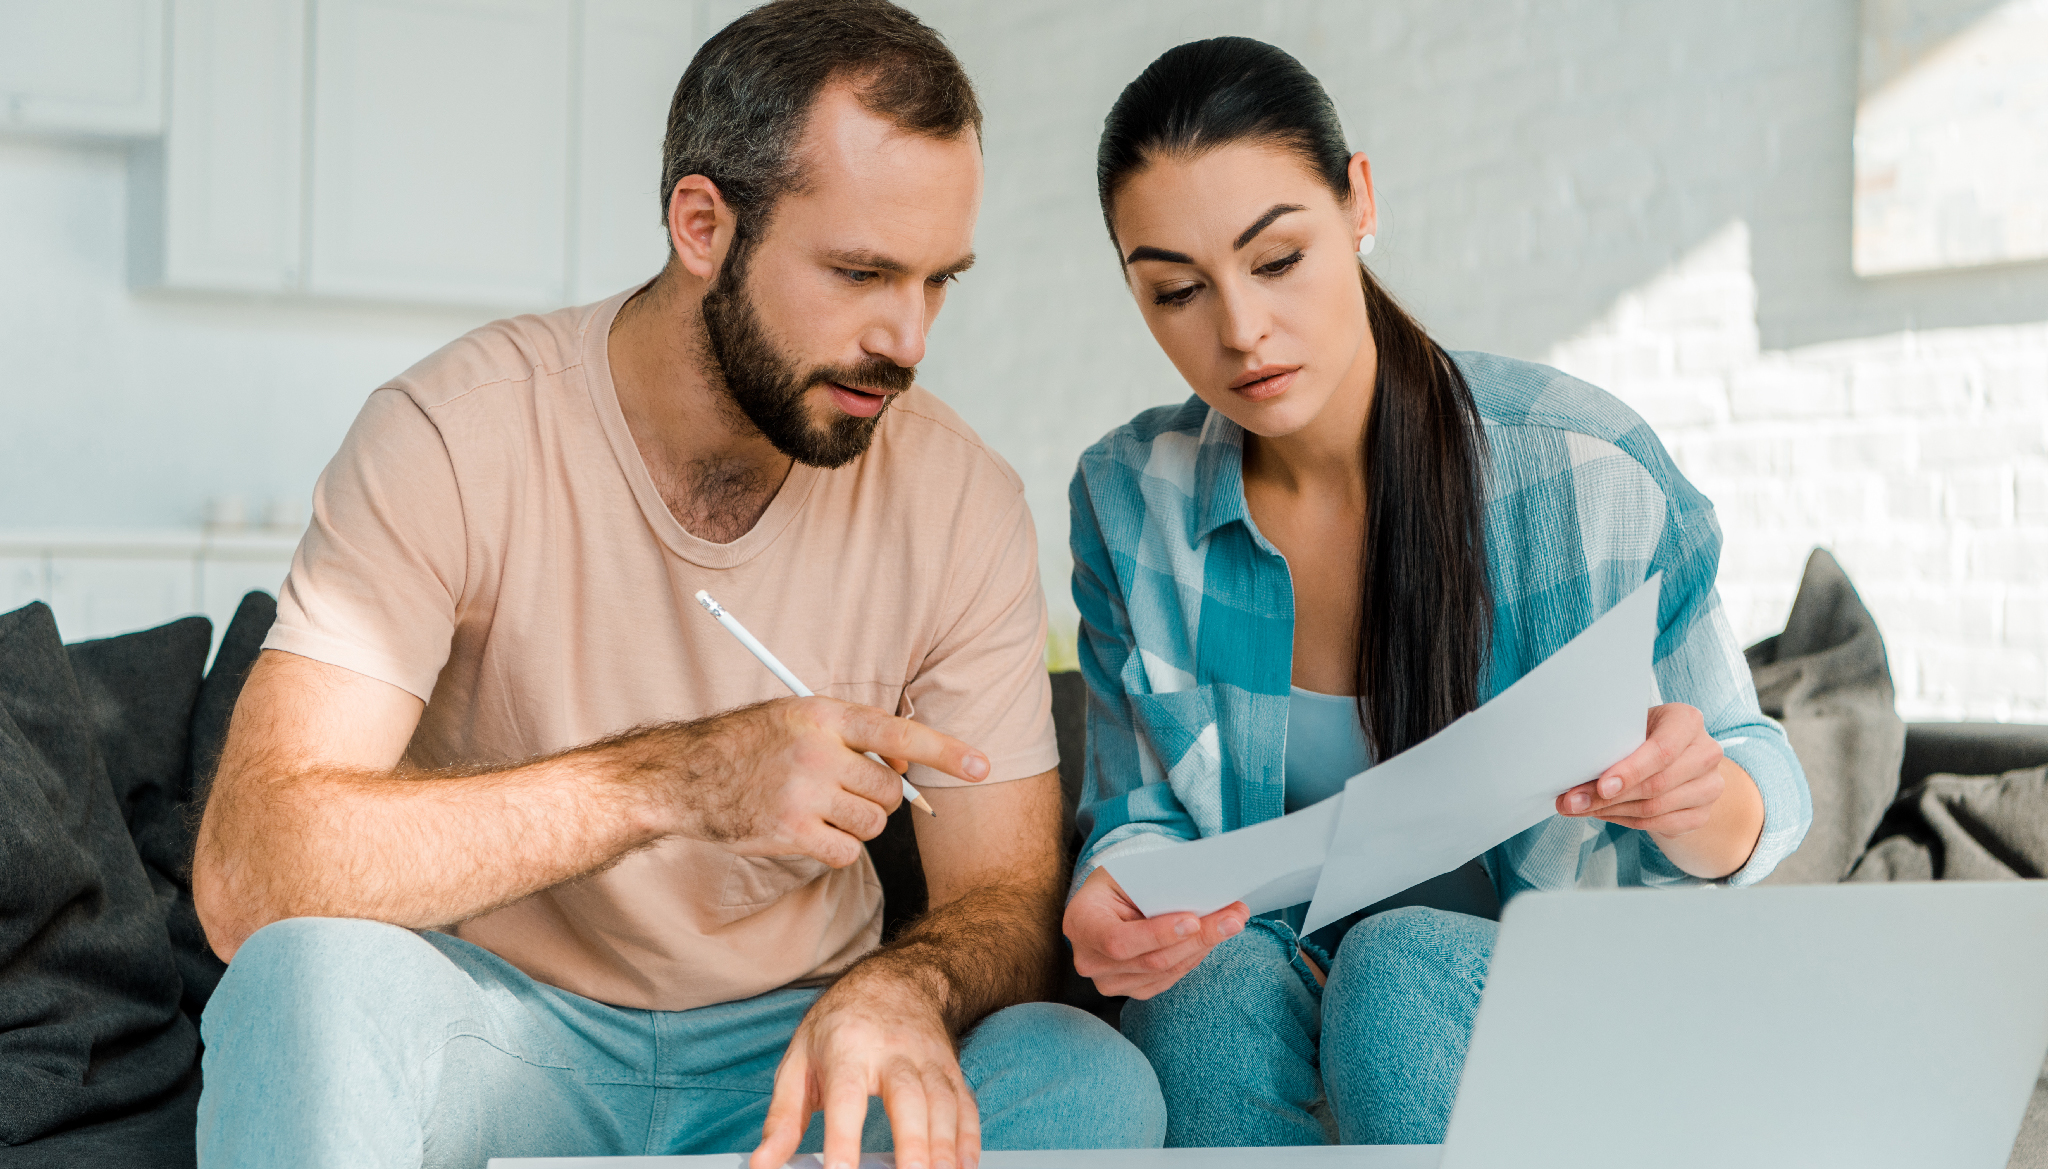 Adult male and female review documents together on a couch in a house